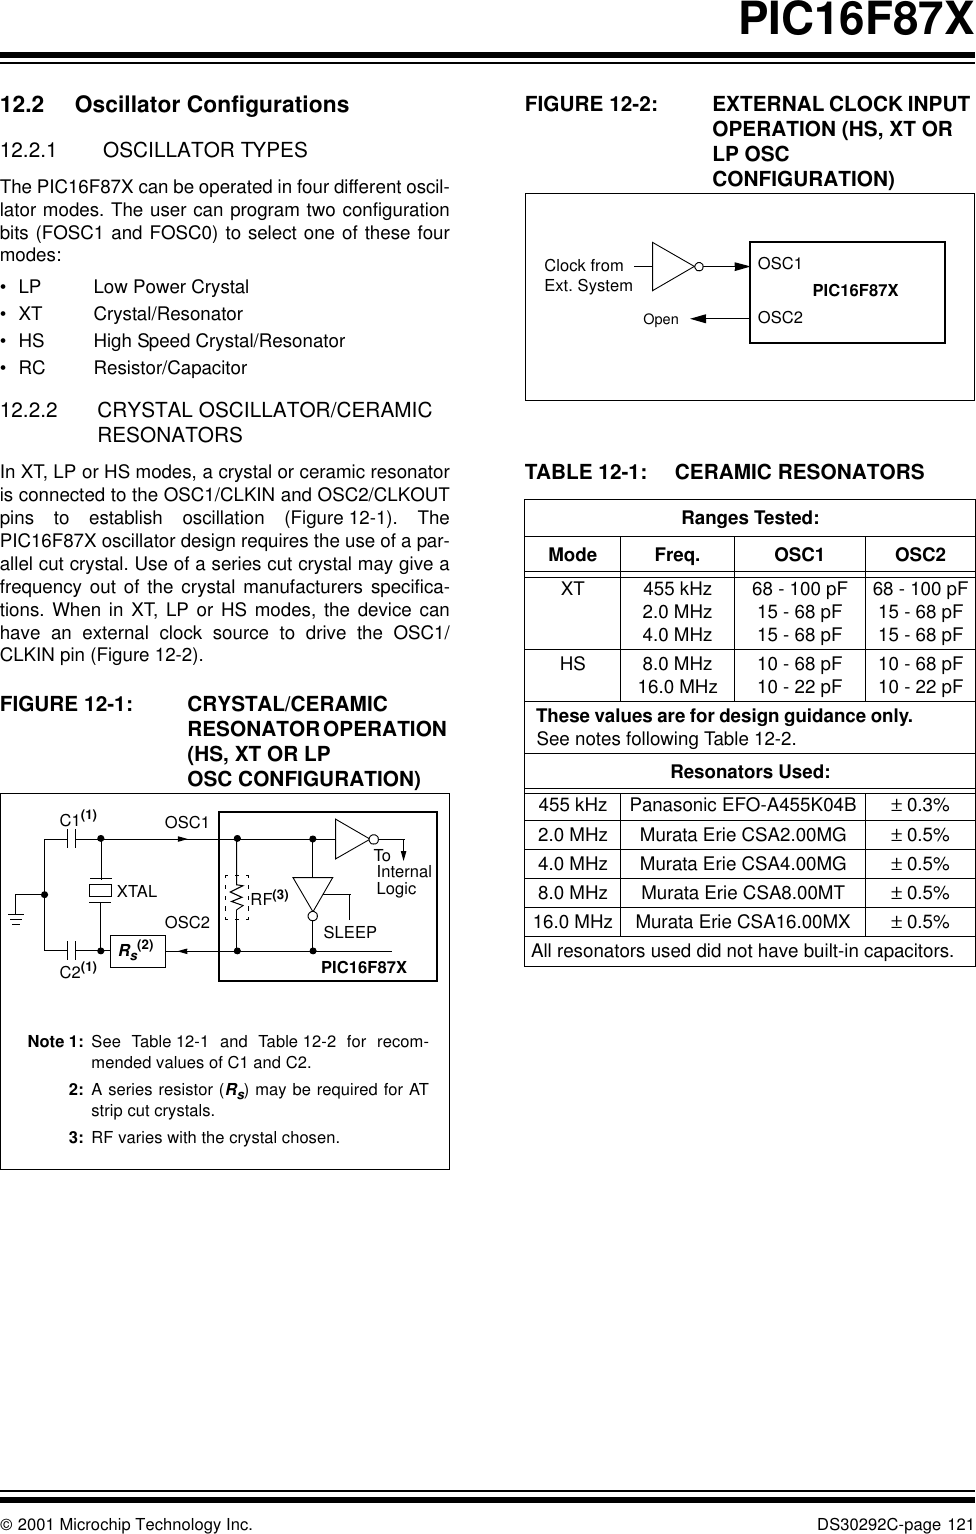  2001 Microchip Technology Inc. DS30292C-page 121PIC16F87X12.2 Oscillator Configurations12.2.1  OSCILLATOR TYPESThe PIC16F87X can be operated in four different oscil-lator modes. The user can program two configurationbits (FOSC1 and FOSC0) to select one of these fourmodes:•LP Low Power Crystal•XT Crystal/Resonator•HS High Speed Crystal/Resonator•RC Resistor/Capacitor12.2.2 CRYSTAL OSCILLATOR/CERAMIC RESONATORSIn XT, LP or HS modes, a crystal or ceramic resonatoris connected to the OSC1/CLKIN and OSC2/CLKOUTpins to establish oscillation (Figure 12-1). ThePIC16F87X oscillator design requires the use of a par-allel cut crystal. Use of a series cut crystal may give afrequency out of the crystal manufacturers specifica-tions. When in XT, LP or HS modes, the device canhave an external clock source to drive the OSC1/CLKIN pin (Figure 12-2).FIGURE 12-1: CRYSTAL/CERAMIC RESONATOR OPERATION (HS, XT OR LP OSC CONFIGURATION)FIGURE 12-2: EXTERNAL CLOCK INPUT OPERATION (HS, XT OR LP OSC CONFIGURATION)TABLE 12-1: CERAMIC RESONATORS Note 1: See Table 12-1 and Table 12-2 for recom-mended values of C1 and C2.2: A series resistor (Rs) may be required for ATstrip cut crystals.3: RF varies with the crystal chosen.C1(1)C2(1)XTALOSC2OSC1RF(3)SLEEPToLogicPIC16F87XRs(2)InternalRanges Tested:Mode Freq. OSC1 OSC2XT 455 kHz2.0 MHz4.0 MHz68 - 100 pF15 - 68 pF15 - 68 pF68 - 100 pF15 - 68 pF15 - 68 pFHS 8.0 MHz16.0 MHz 10 - 68 pF10 - 22 pF 10 - 68 pF10 - 22 pFThese values are for design guidance only. See notes following Table 12-2.Resonators Used:455 kHz Panasonic EFO-A455K04B ± 0.3%2.0 MHz Murata Erie CSA2.00MG ± 0.5%4.0 MHz Murata Erie CSA4.00MG ± 0.5%8.0 MHz Murata Erie CSA8.00MT ± 0.5%16.0 MHz Murata Erie CSA16.00MX ± 0.5%All resonators used did not have built-in capacitors.OSC1OSC2OpenClock fromExt. System PIC16F87X